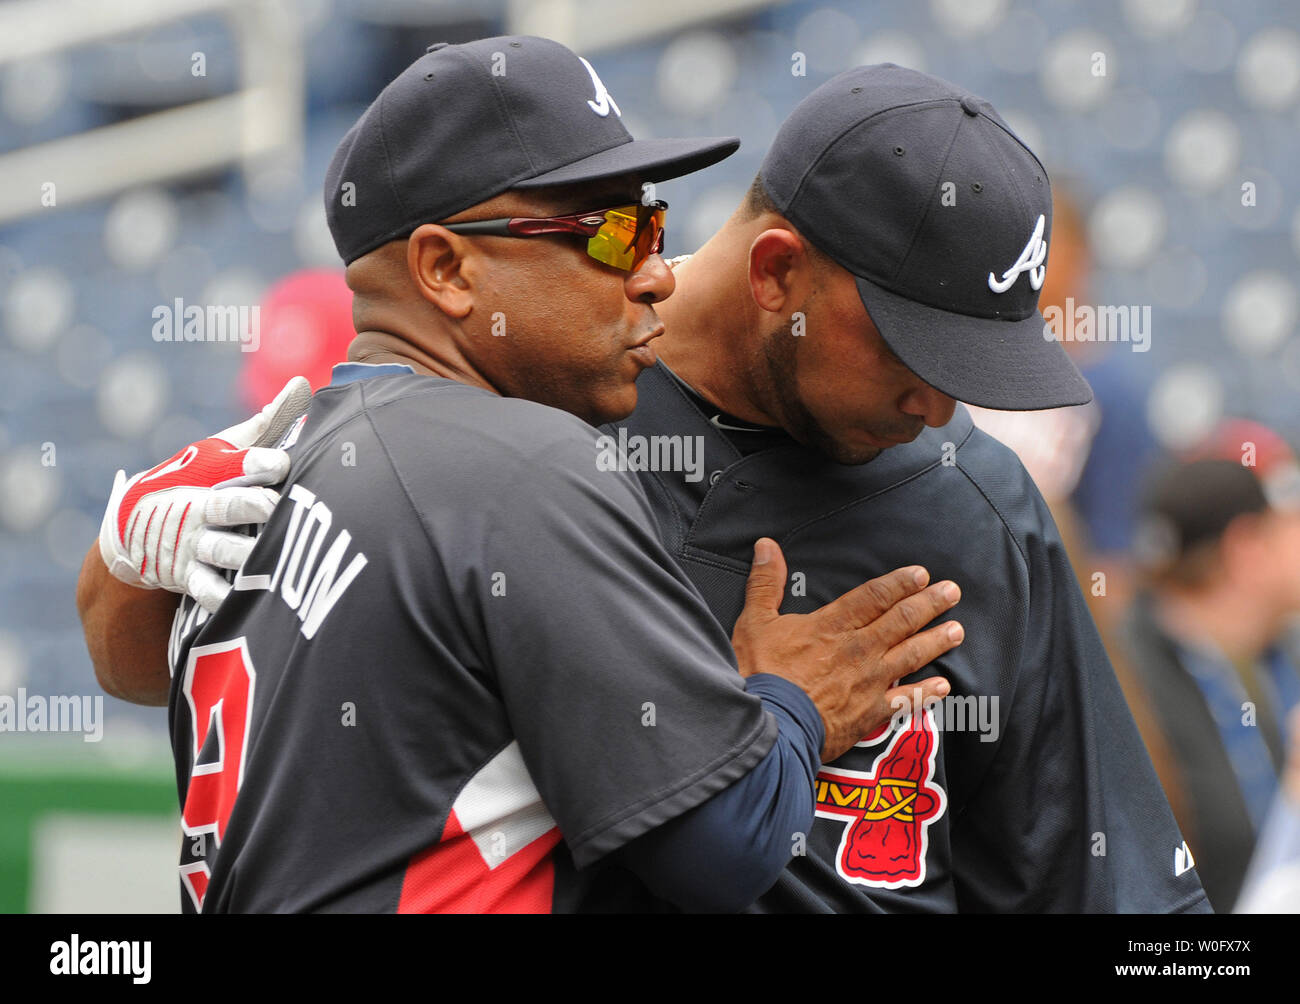 Terry pendleton hi-res stock photography and images - Alamy